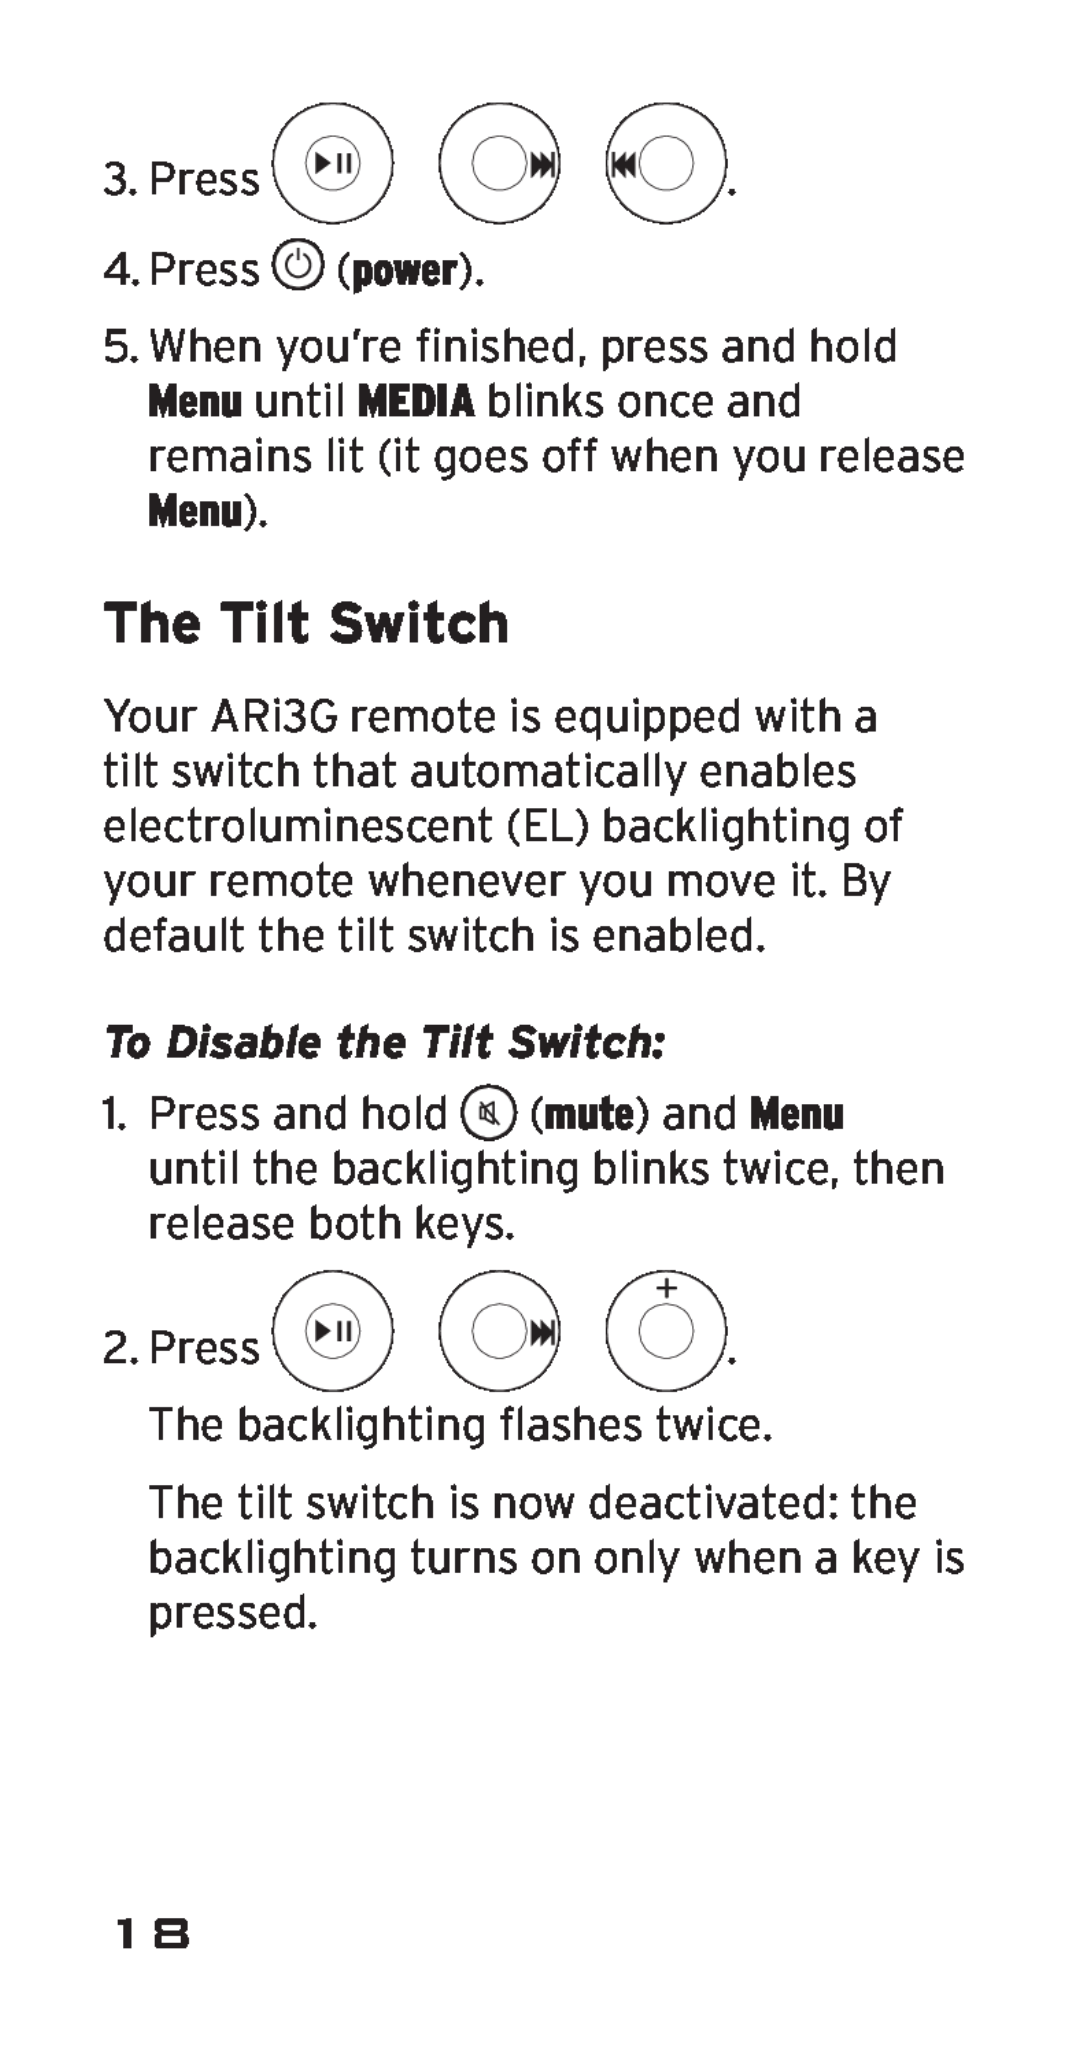 Acoustic Research ARRI03G, ARi3G manual The Tilt Switch, To Disable the Tilt Switch 